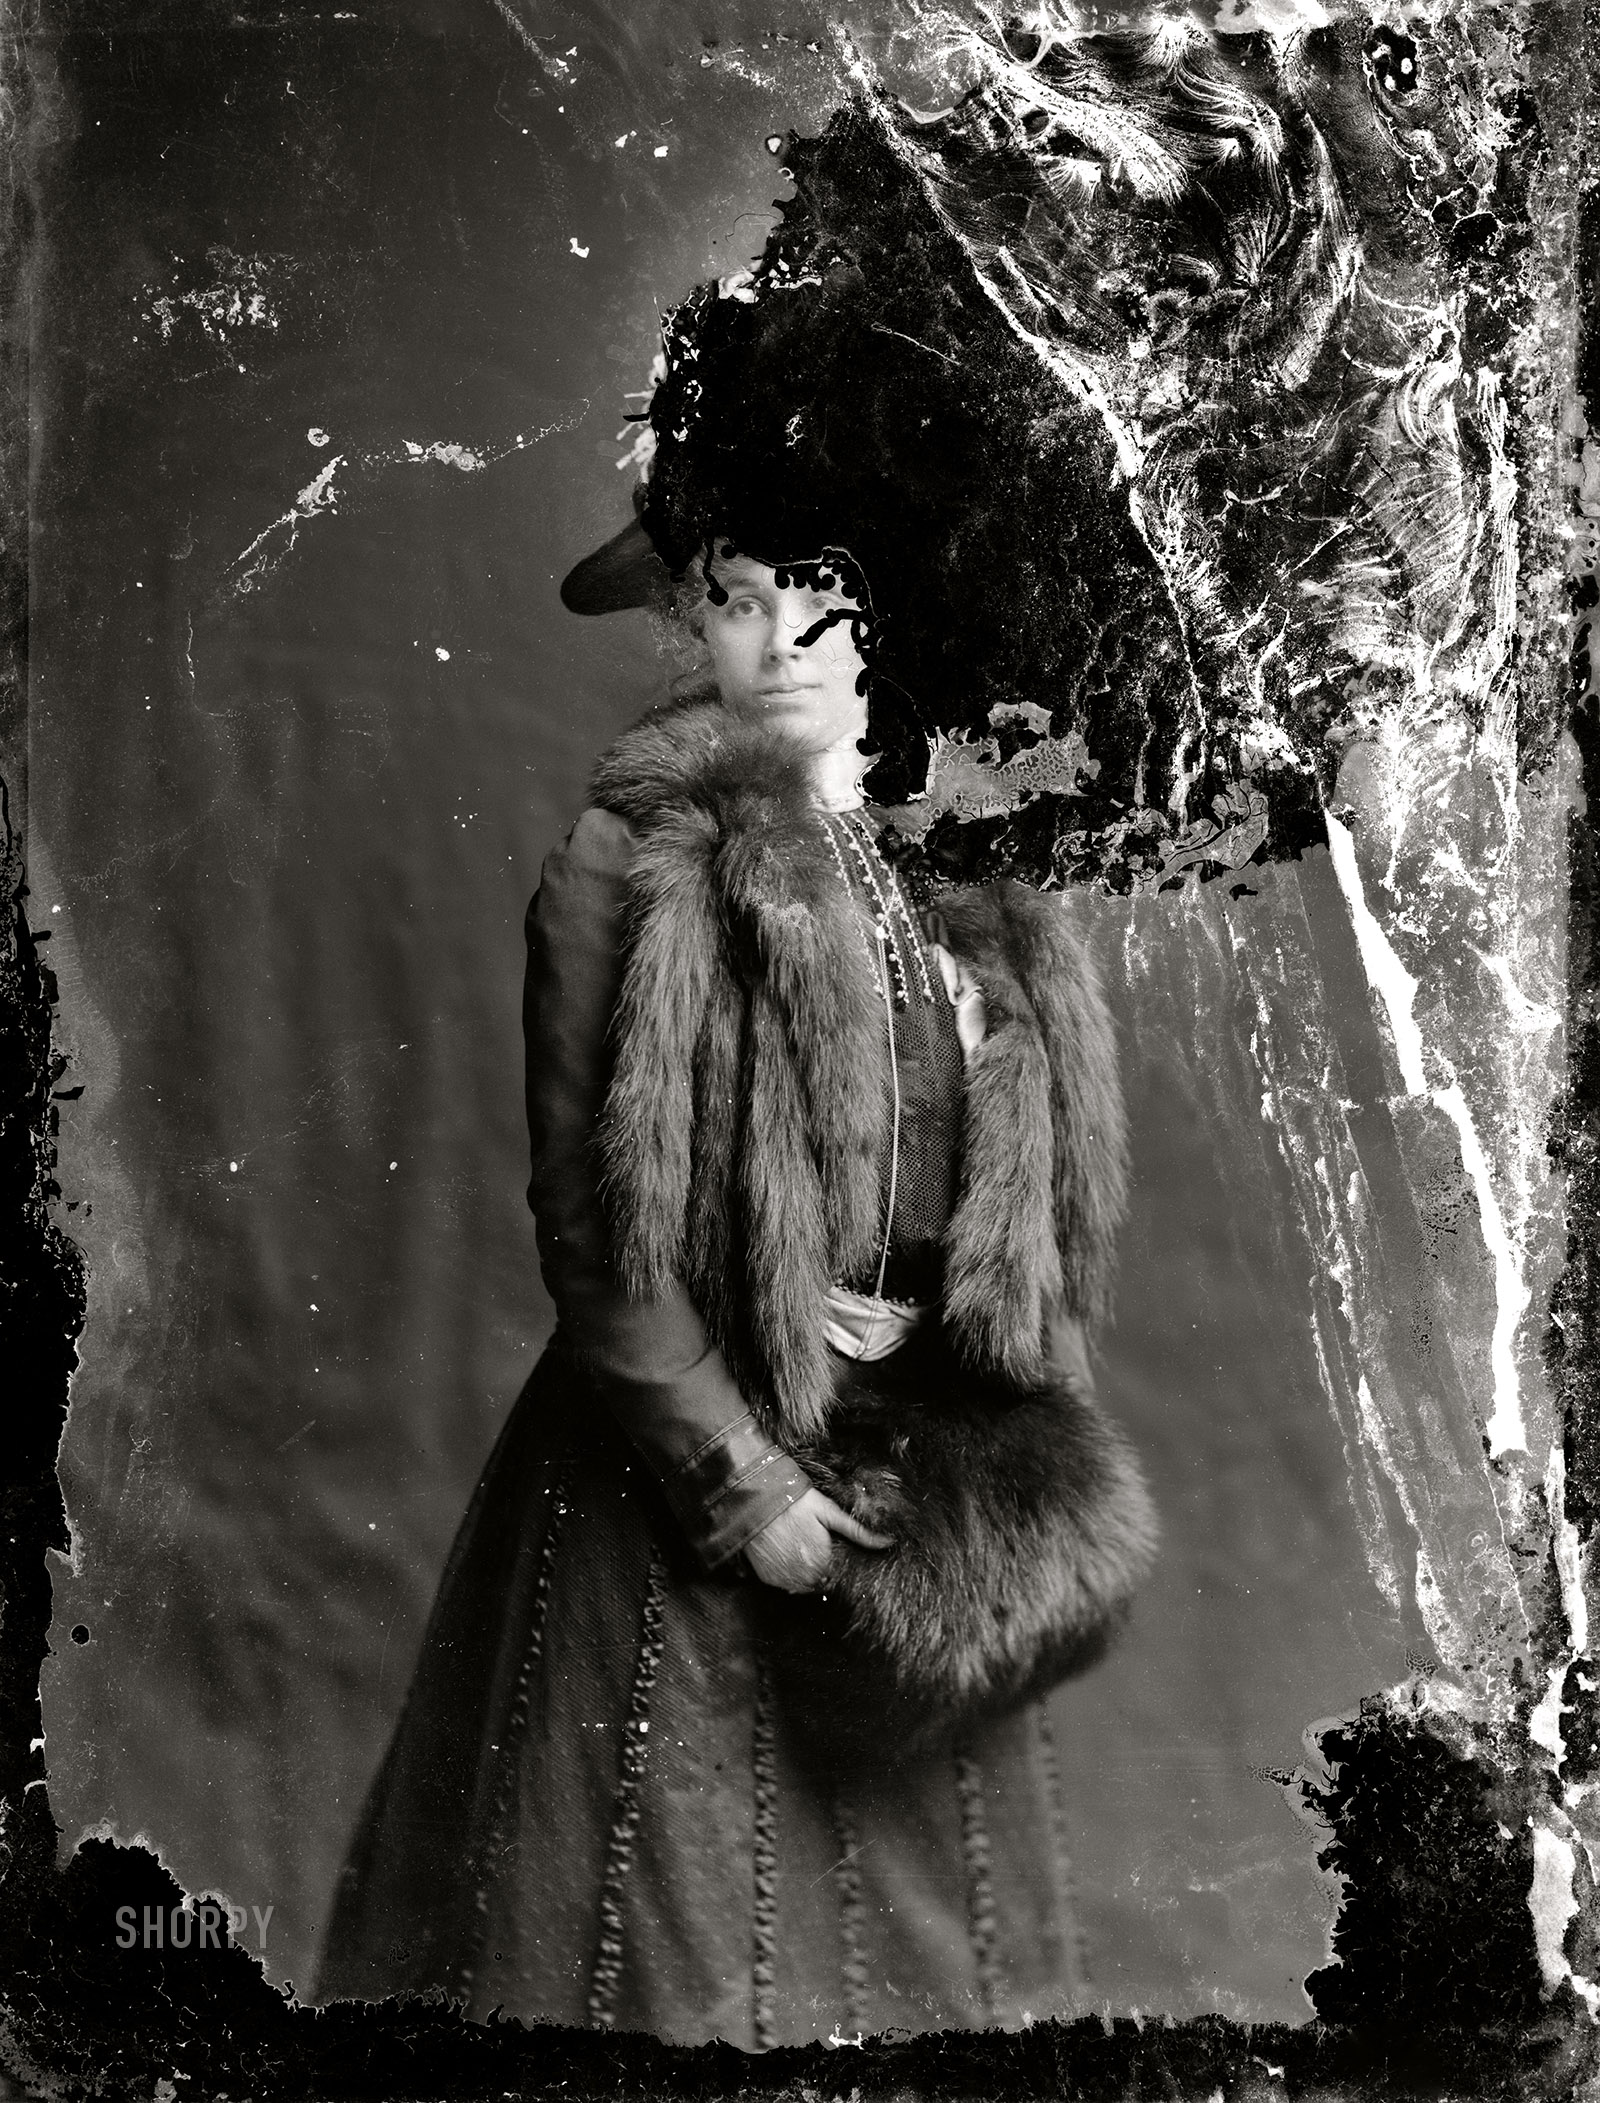 Washington, D.C., between February 1901 and December 1903. "Emerson, Mrs. R.B." 5x7 inch glass negative from the C.M. Bell portrait studio. View full size.